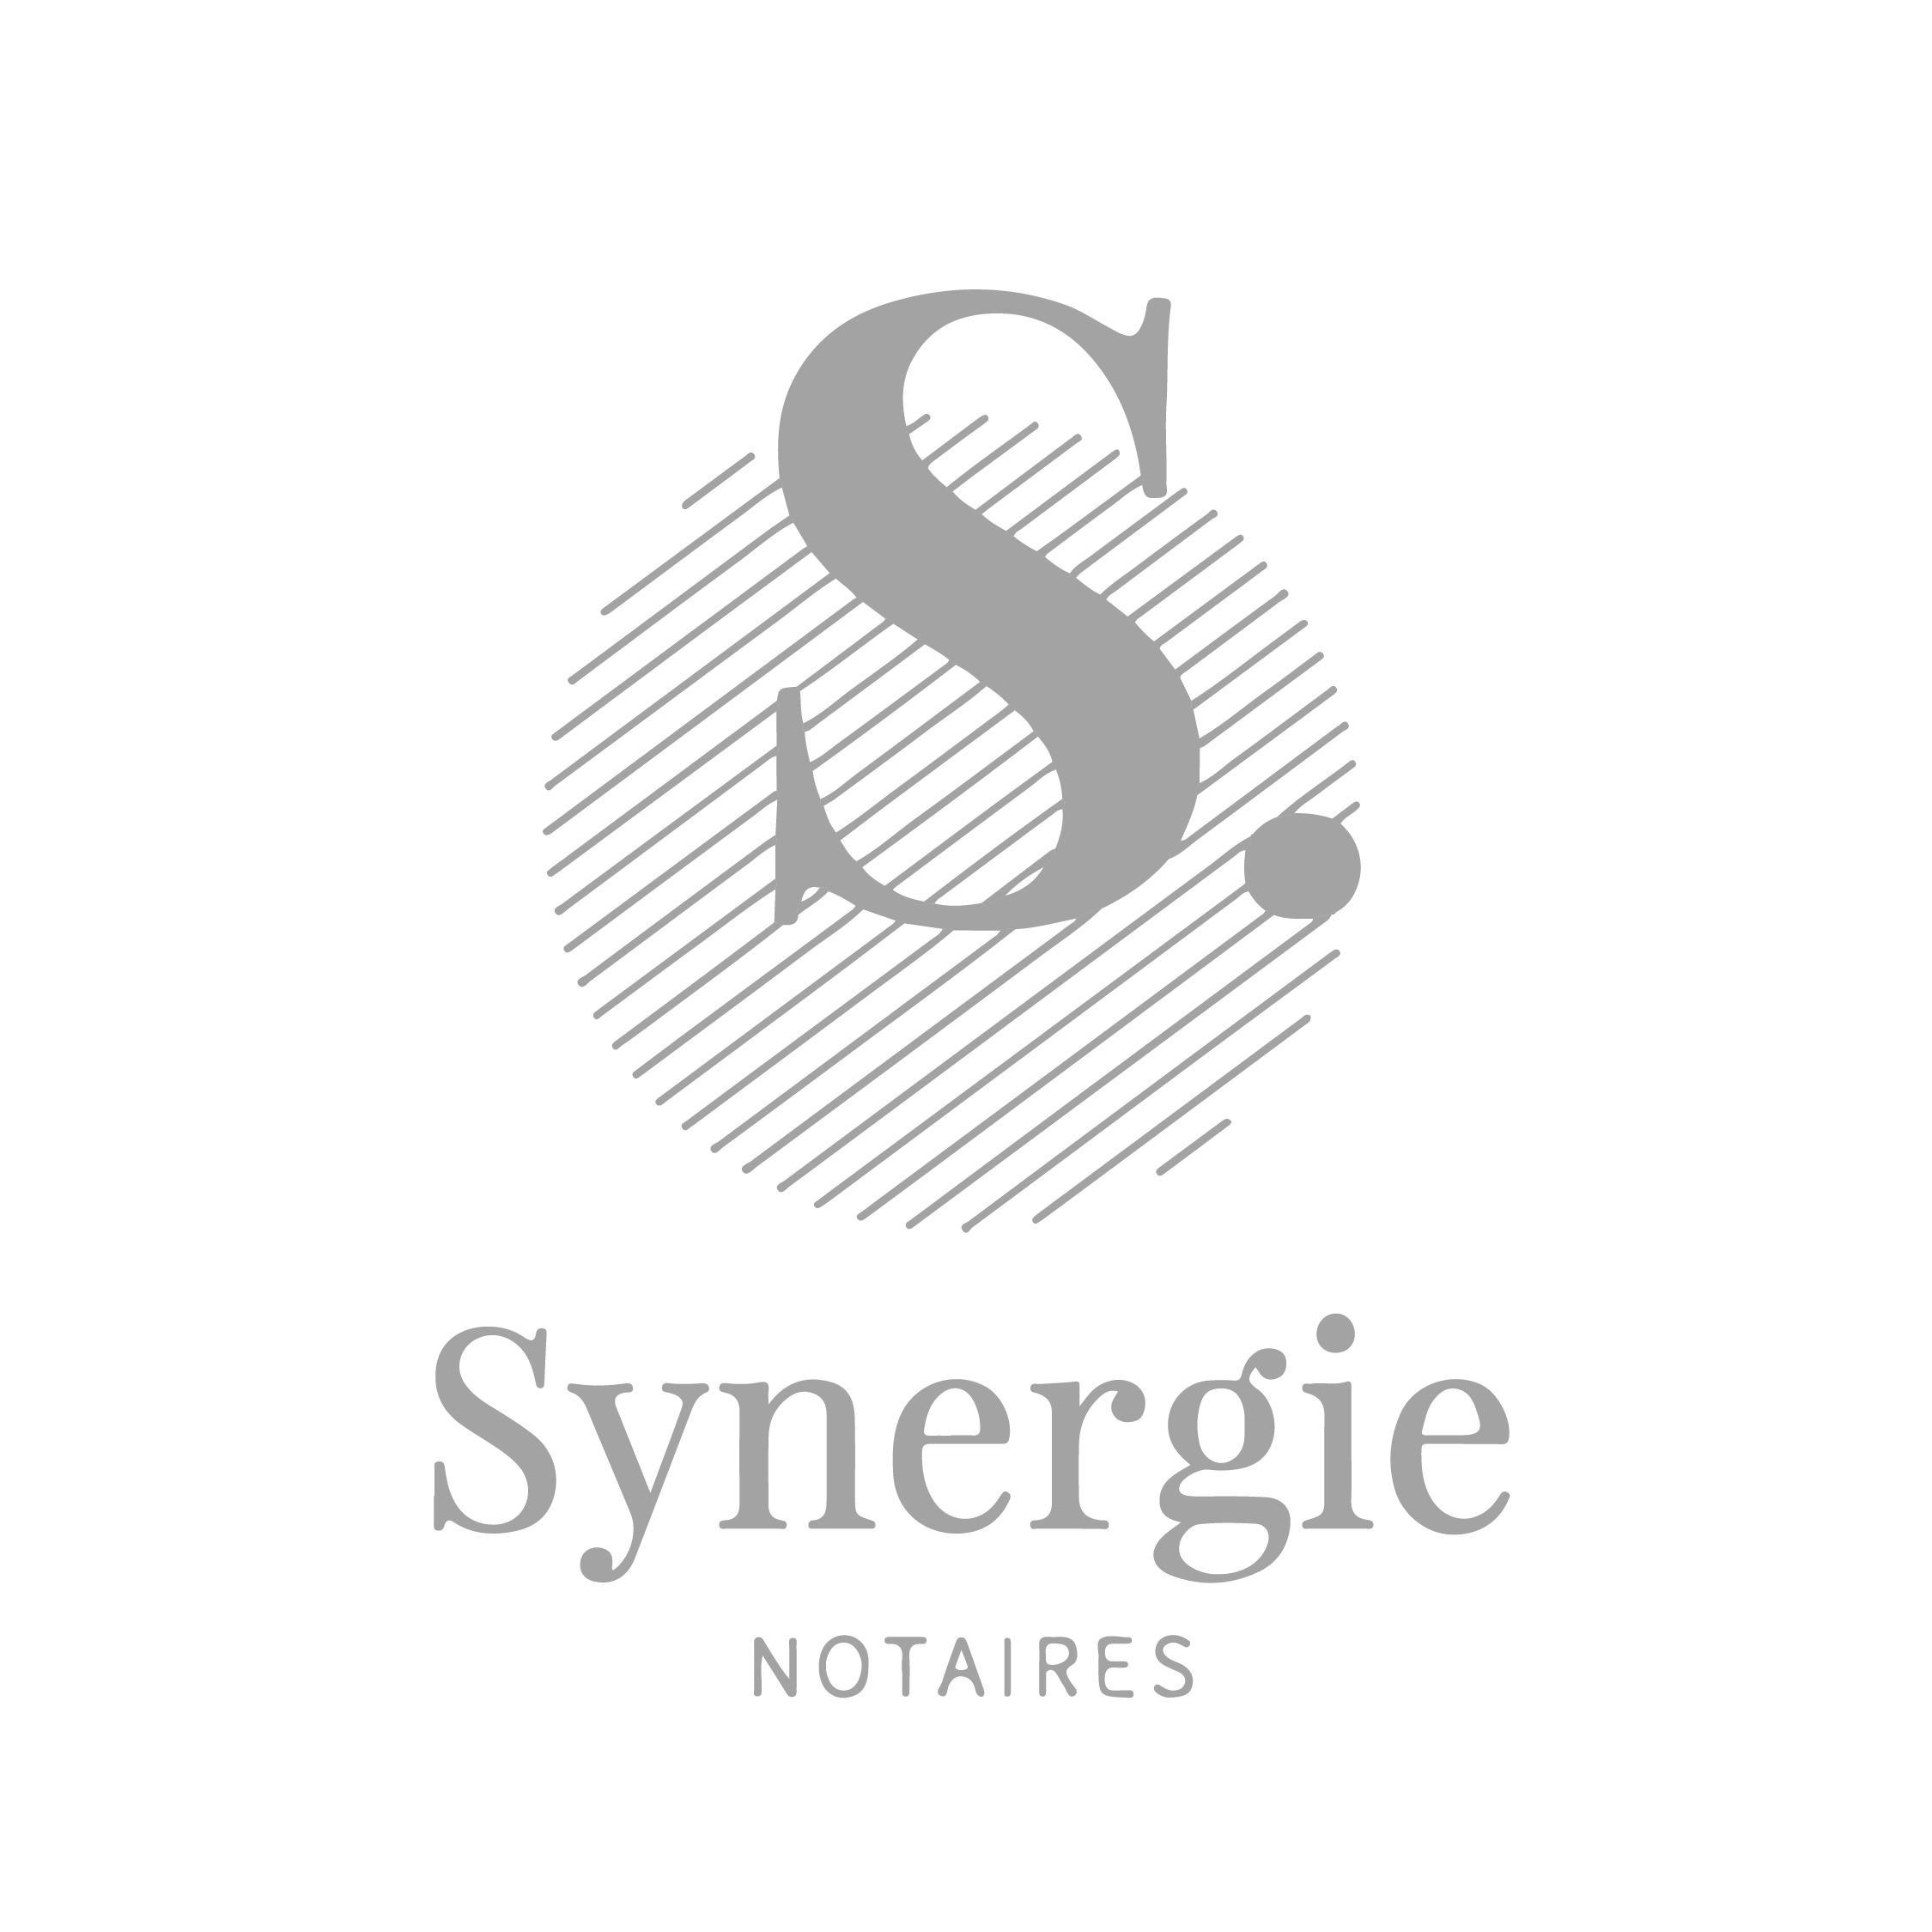 Logo Synergie - Break-Out Company